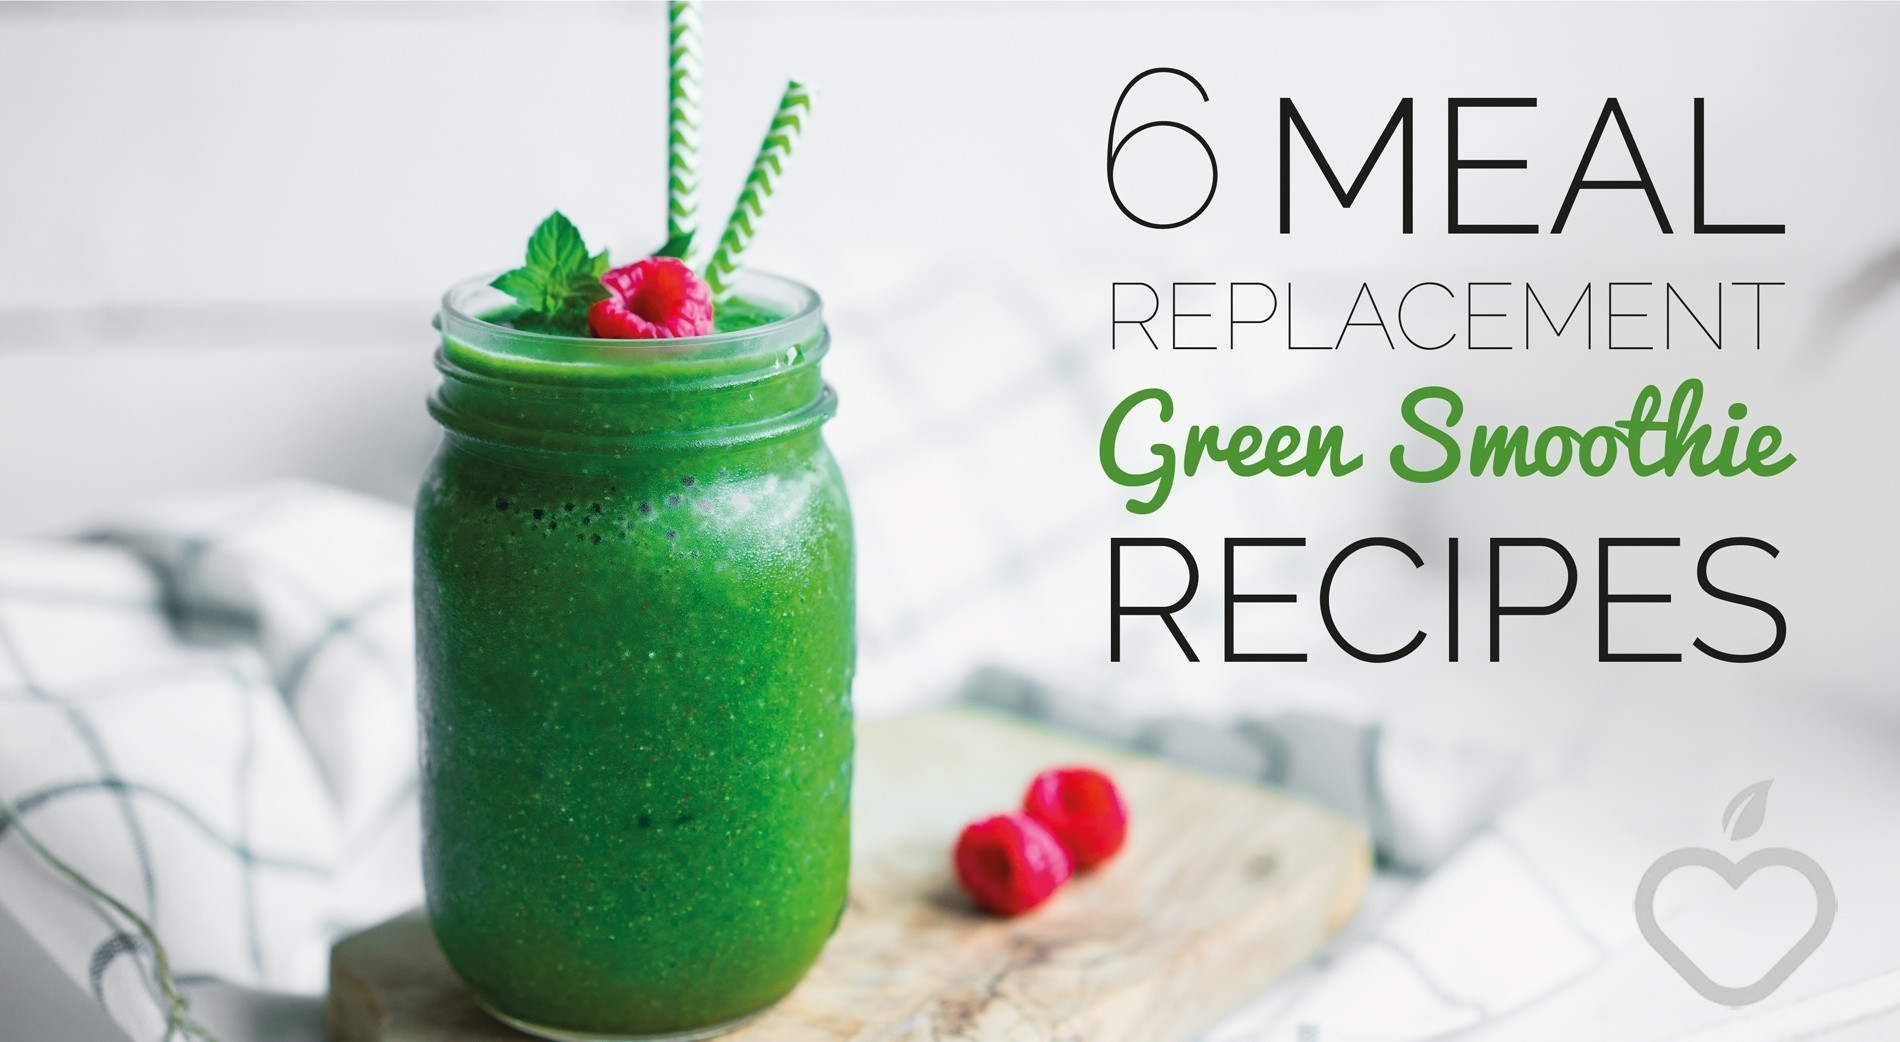 Meal Replacement Smoothie Recipes
 6 Meal Replacement Green Smoothie Recipes No 4 Is Awesome